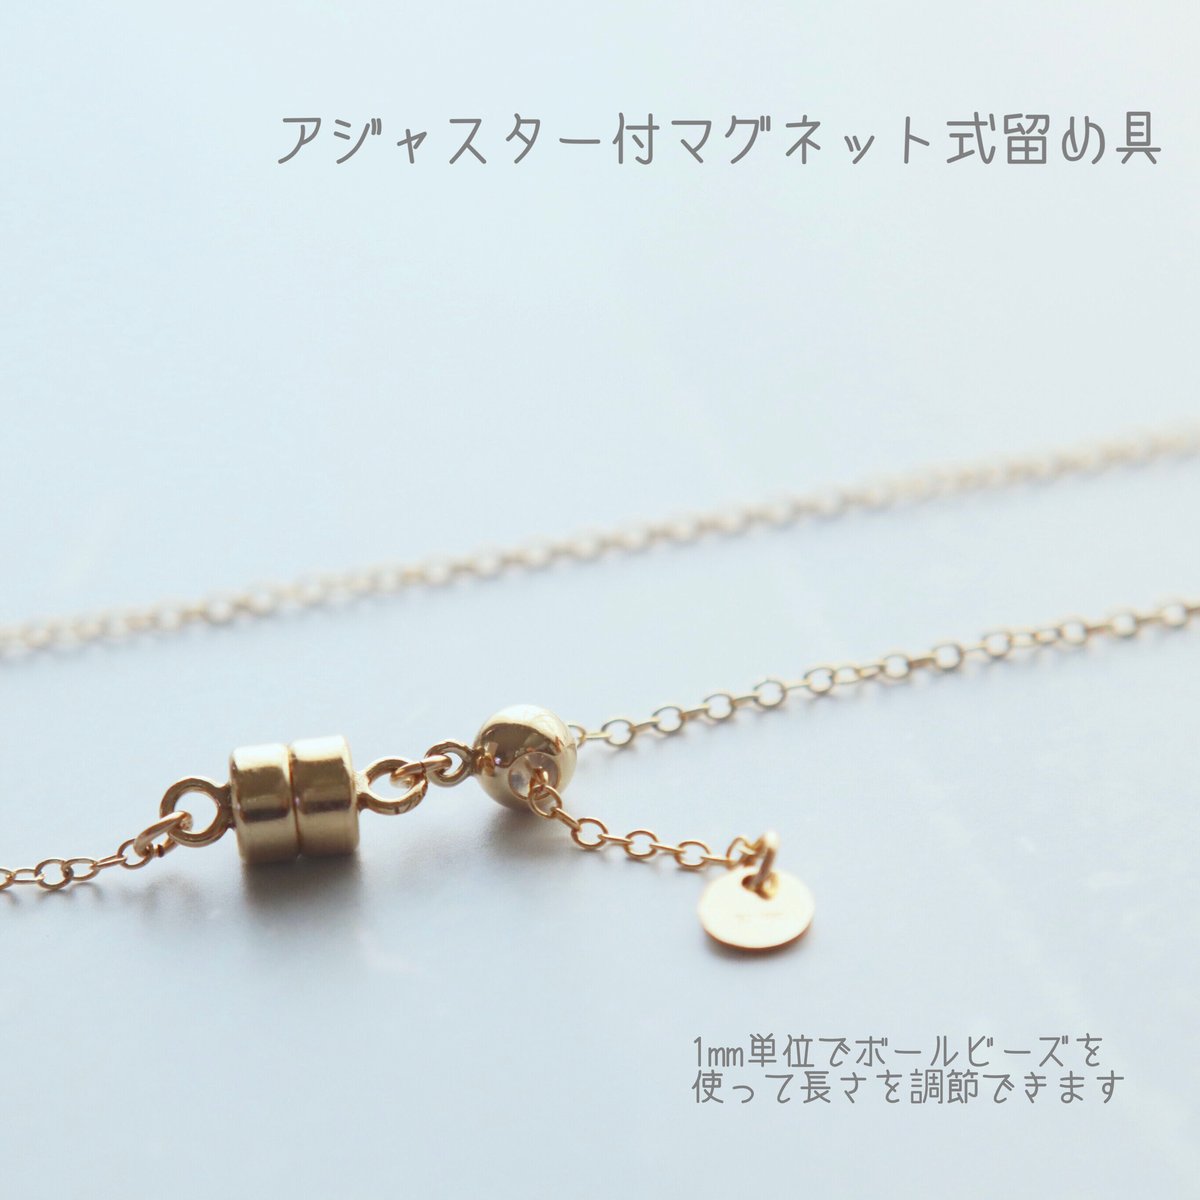 14kgf Cubic zirconia necklace キュービックジルコニアネックレス